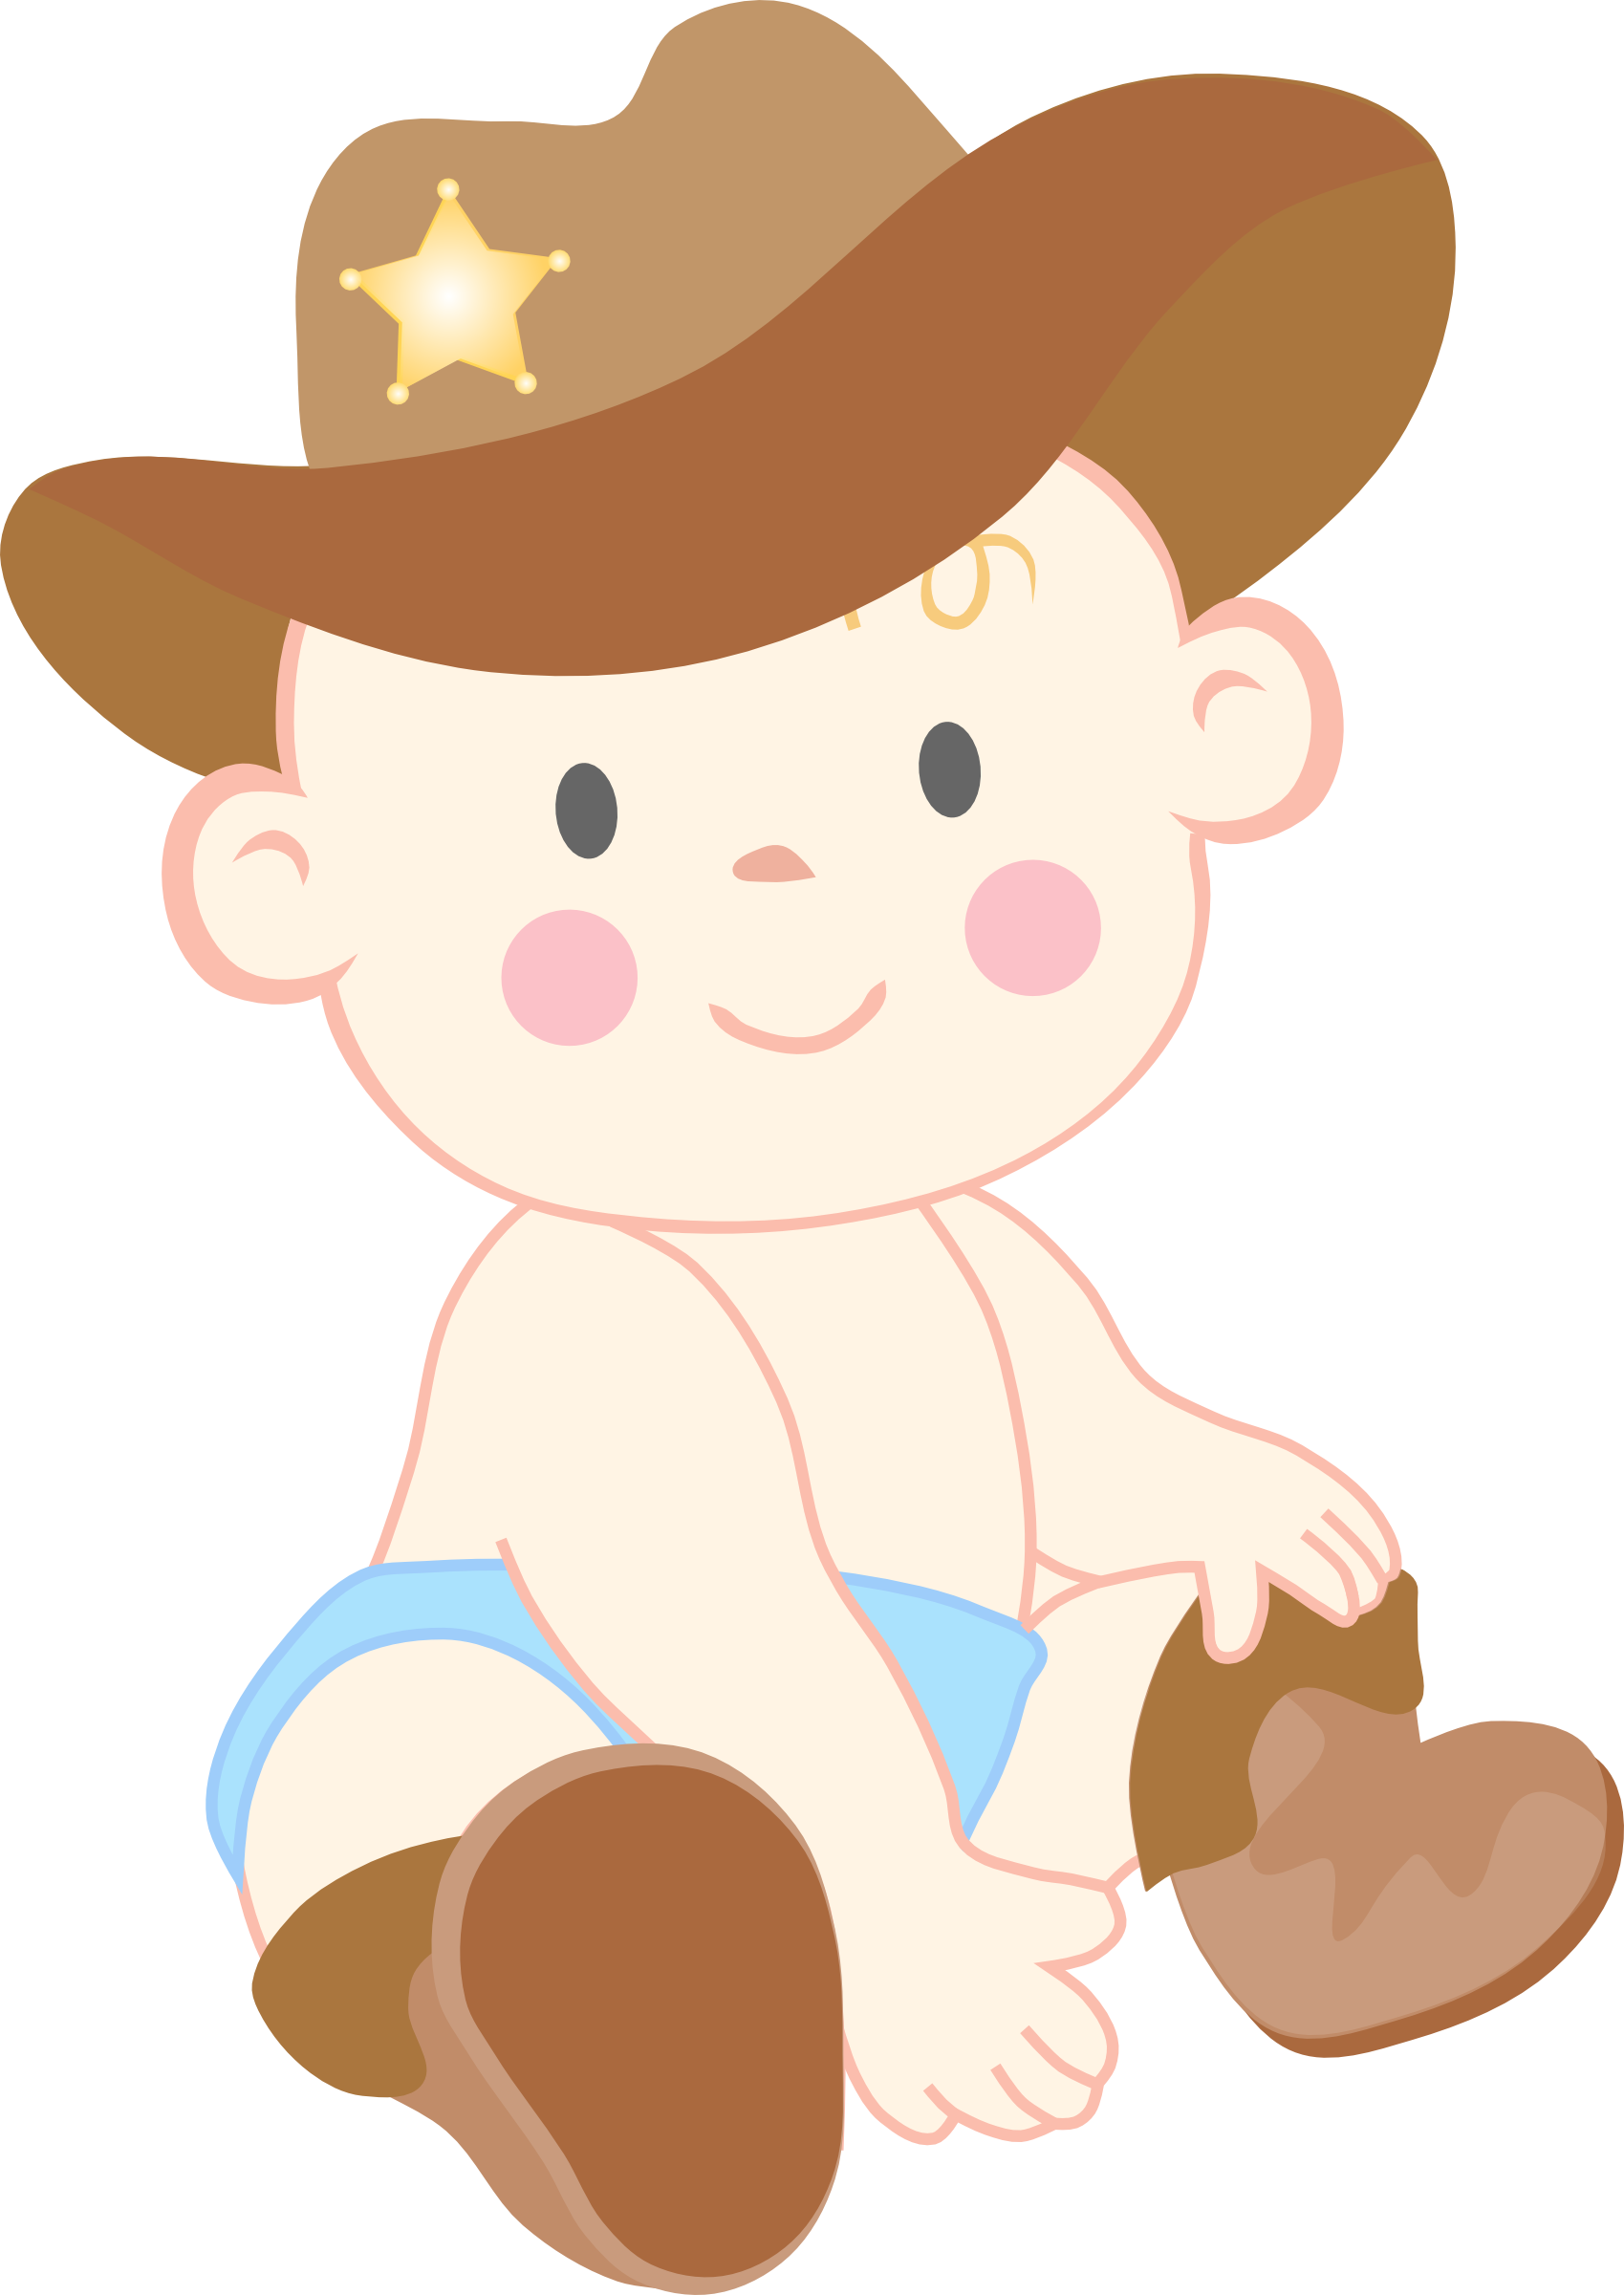 10 Cowboy Baby Boy Free Cliparts That You Can Download To You Computer    